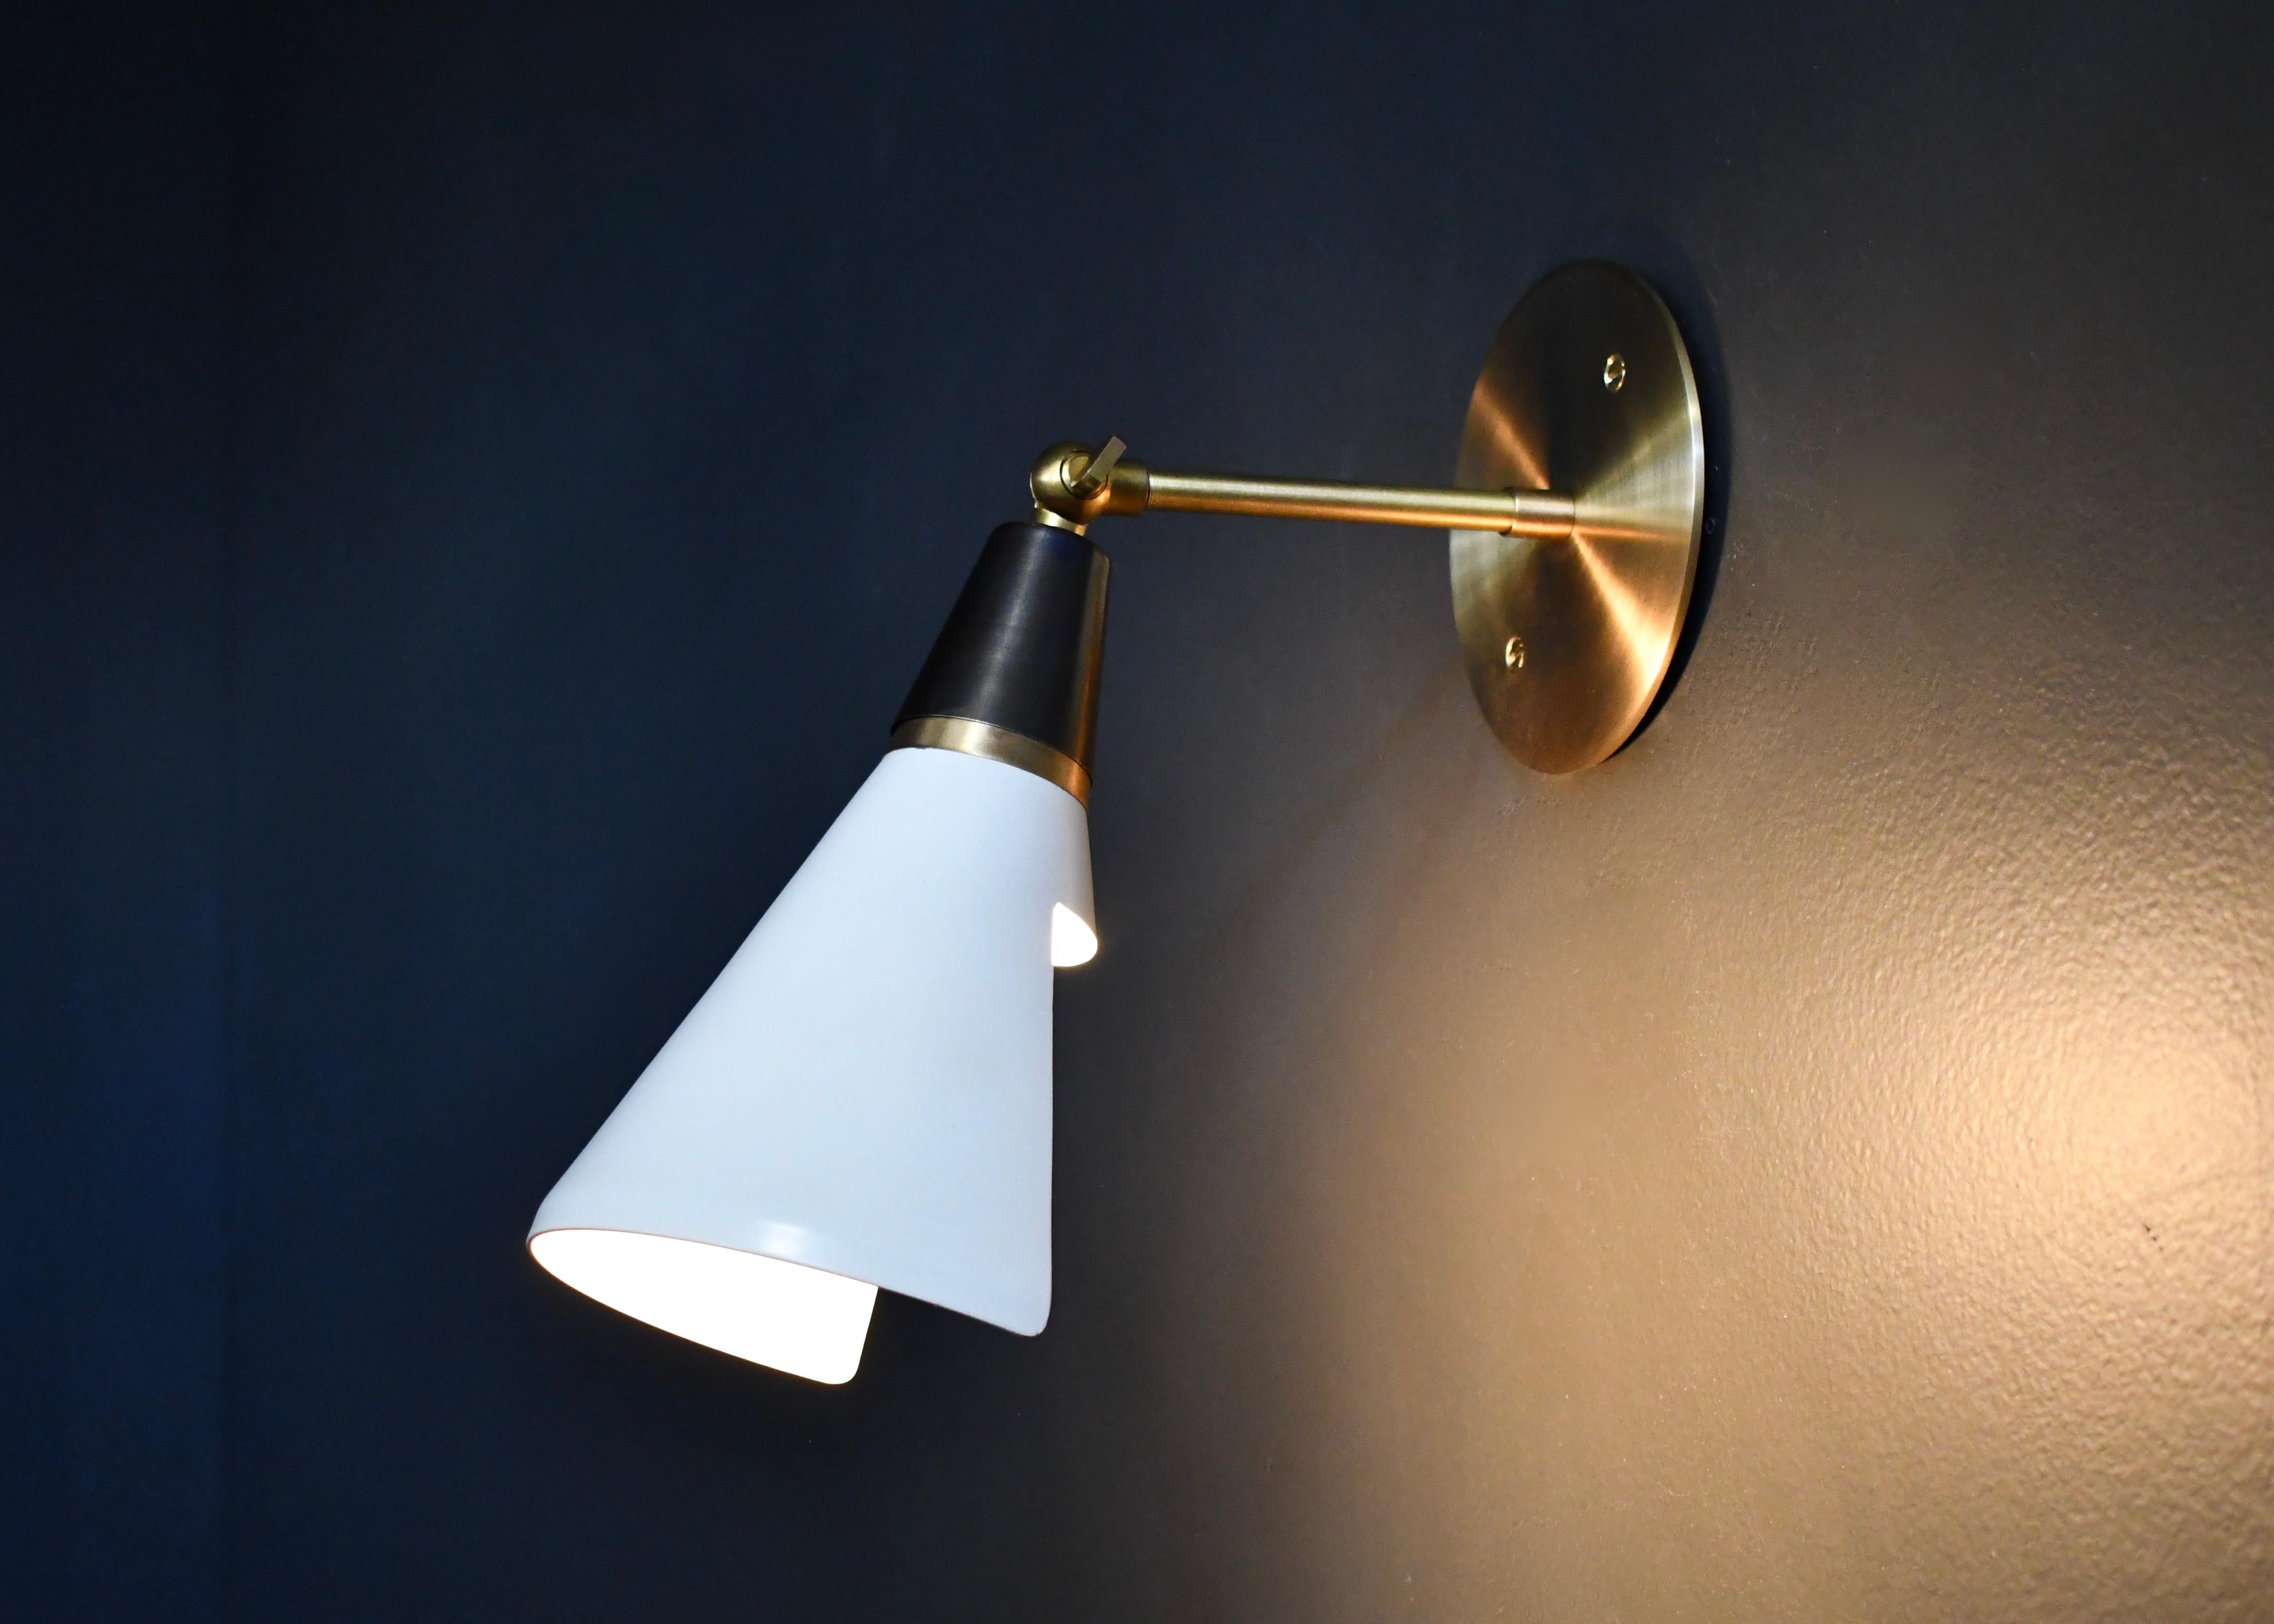 The Petite Magari wall lamp or sconce is handmade to order by Blueprint Lighting. The shade has a swivel mechanism for rotation. This design is strongly influenced by both French and Italian Mid-Century Modernism and features a distinctly beveled